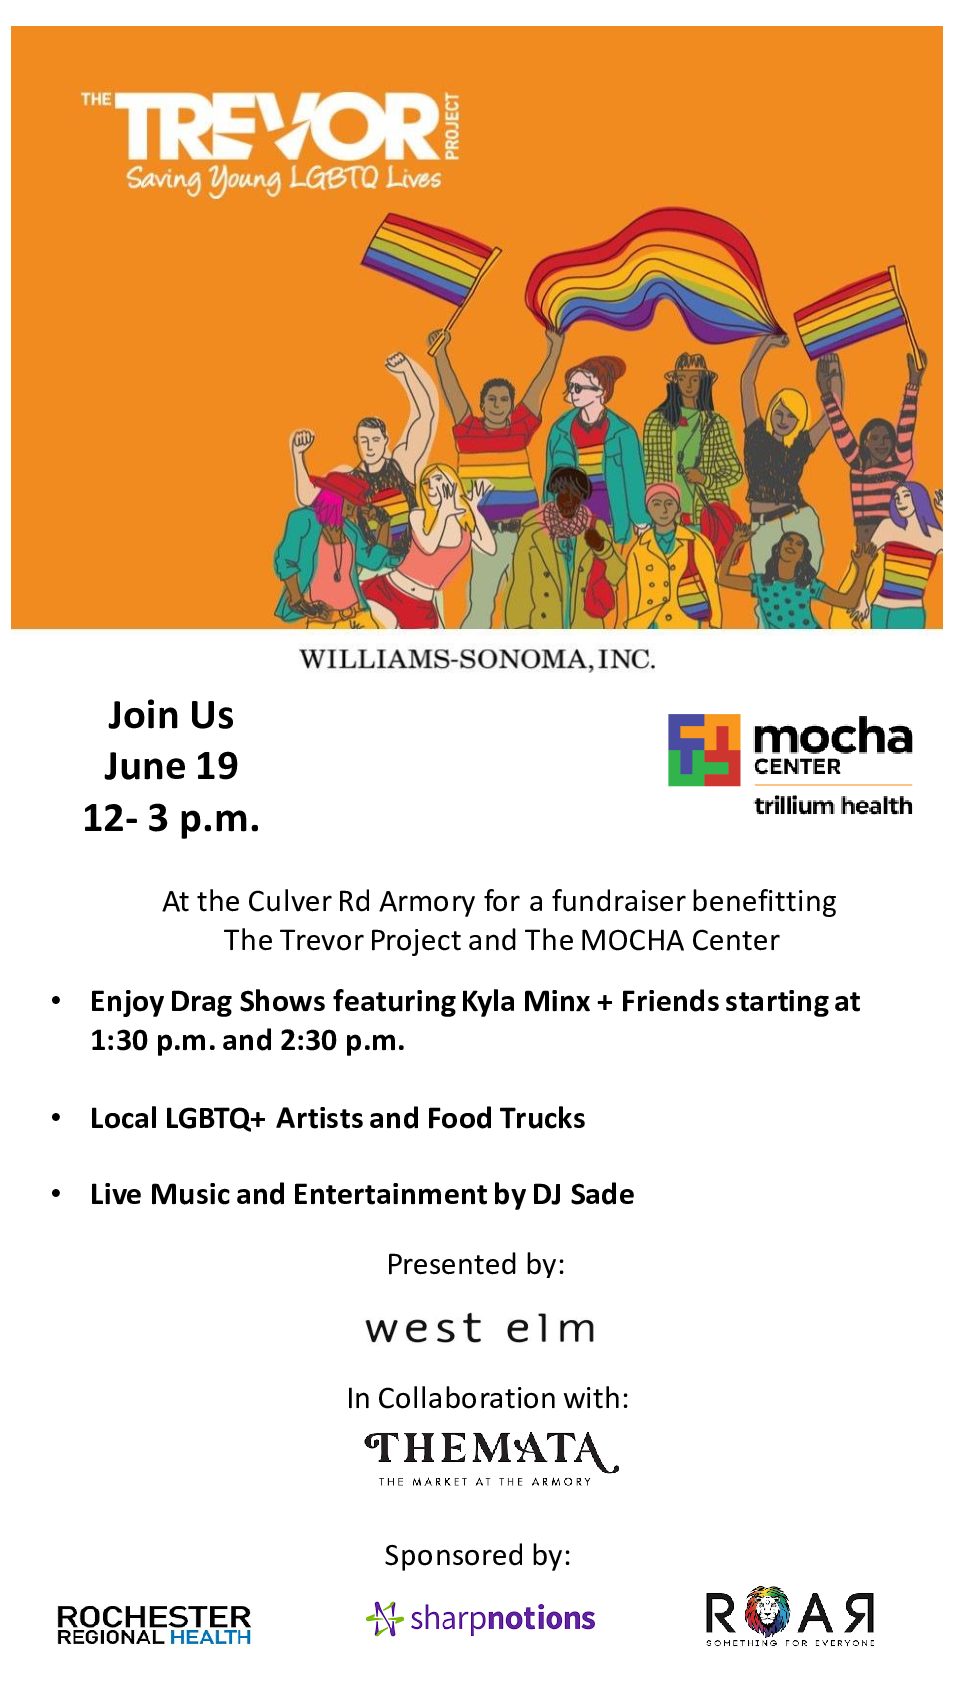 Fundraiser benefiting the Trevor project and the Mocha Center Event Image